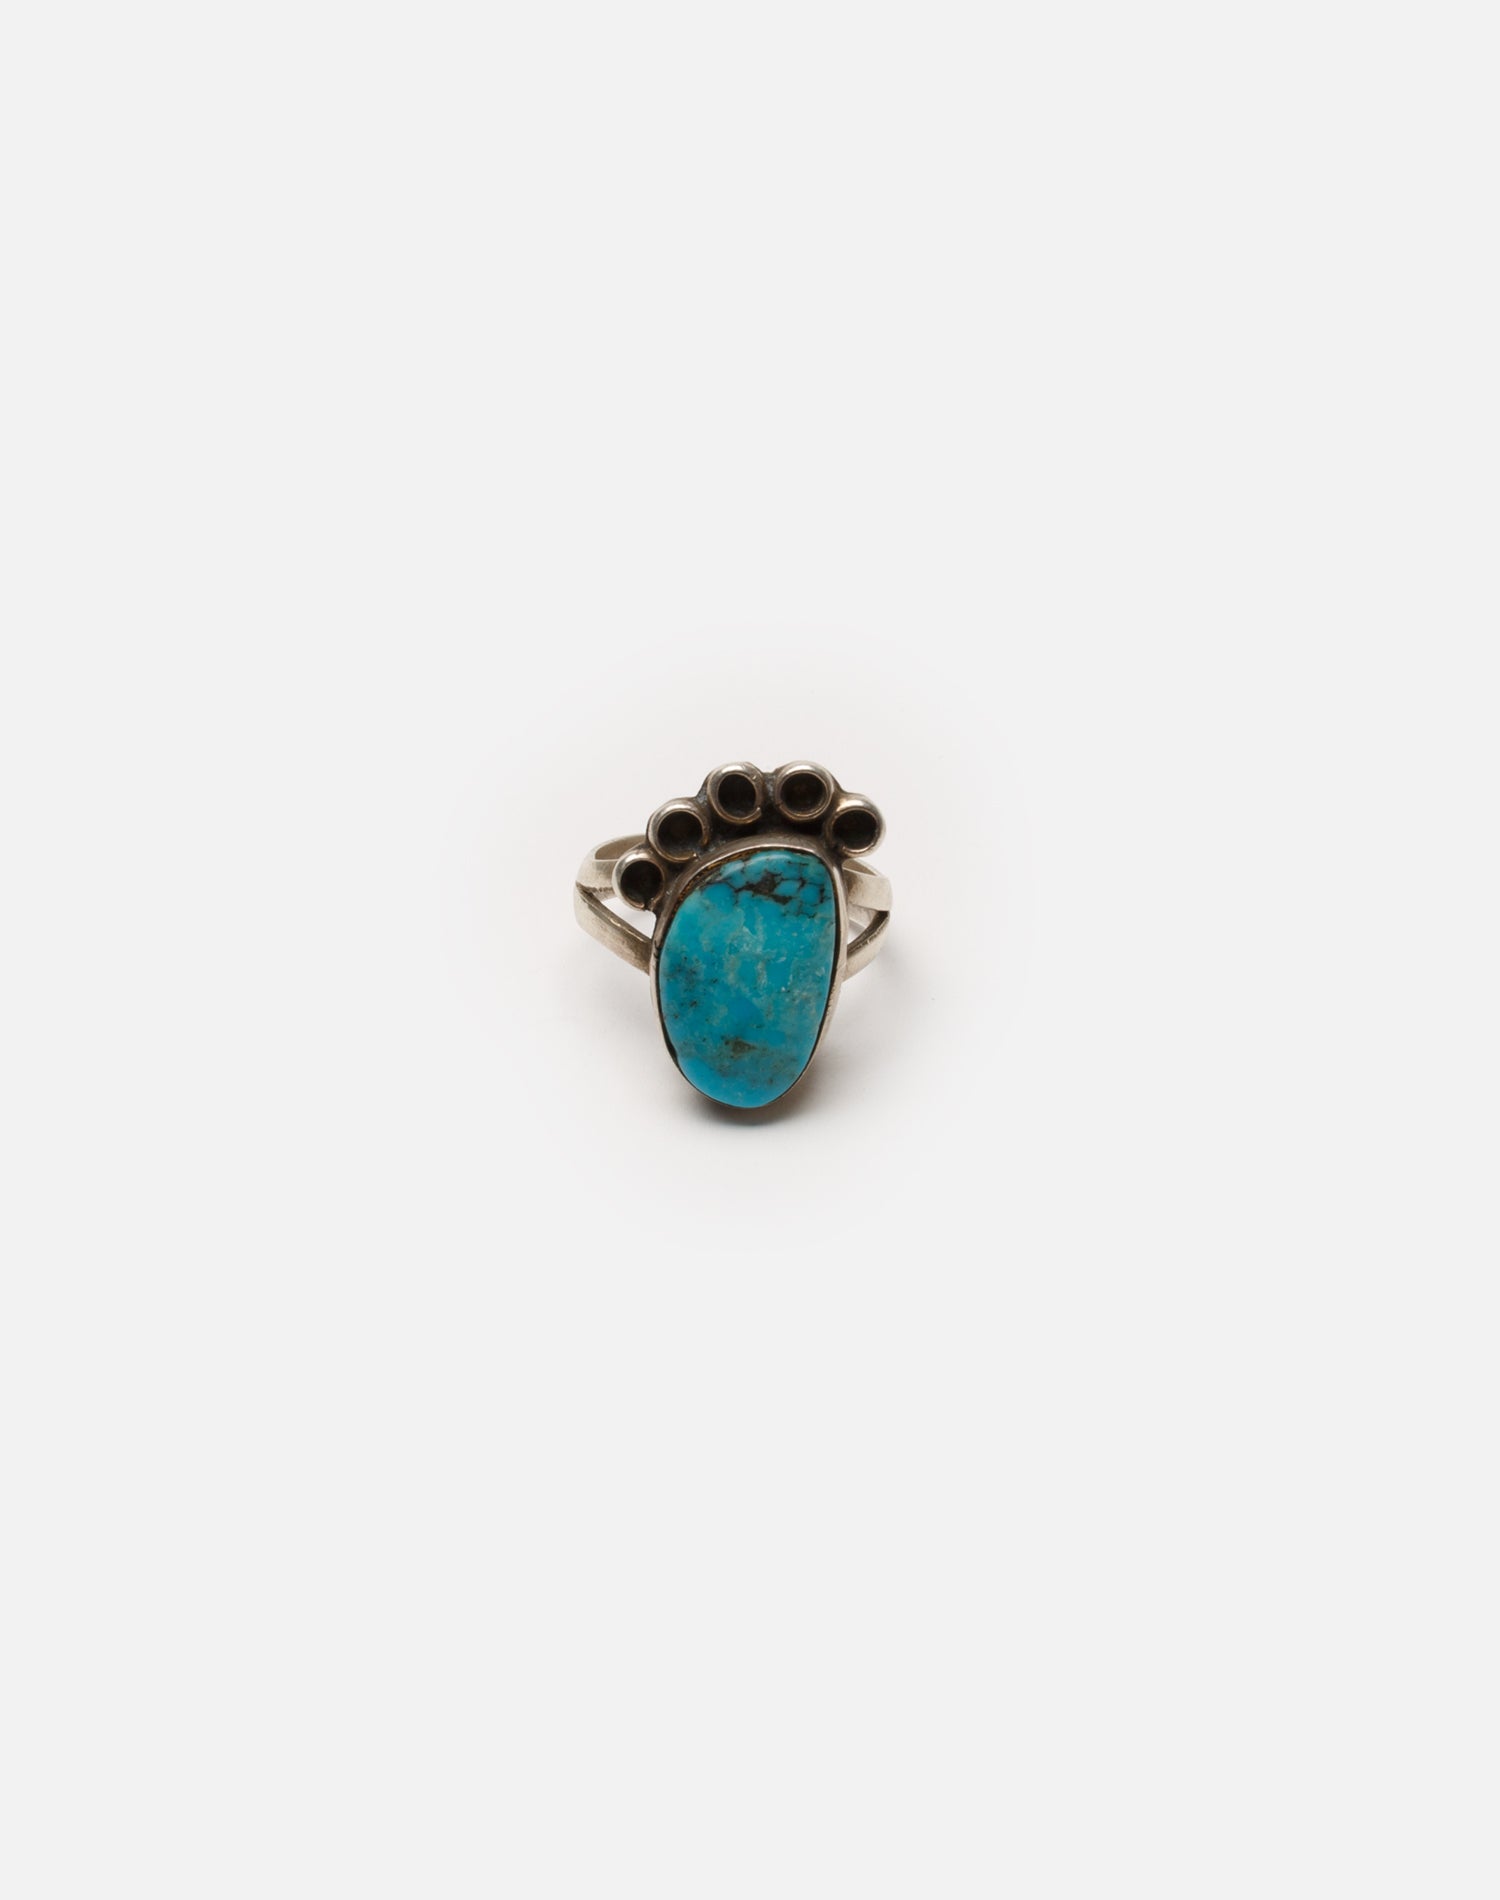 70’s Navajo Turquoise Foot Sterling Silver Ring